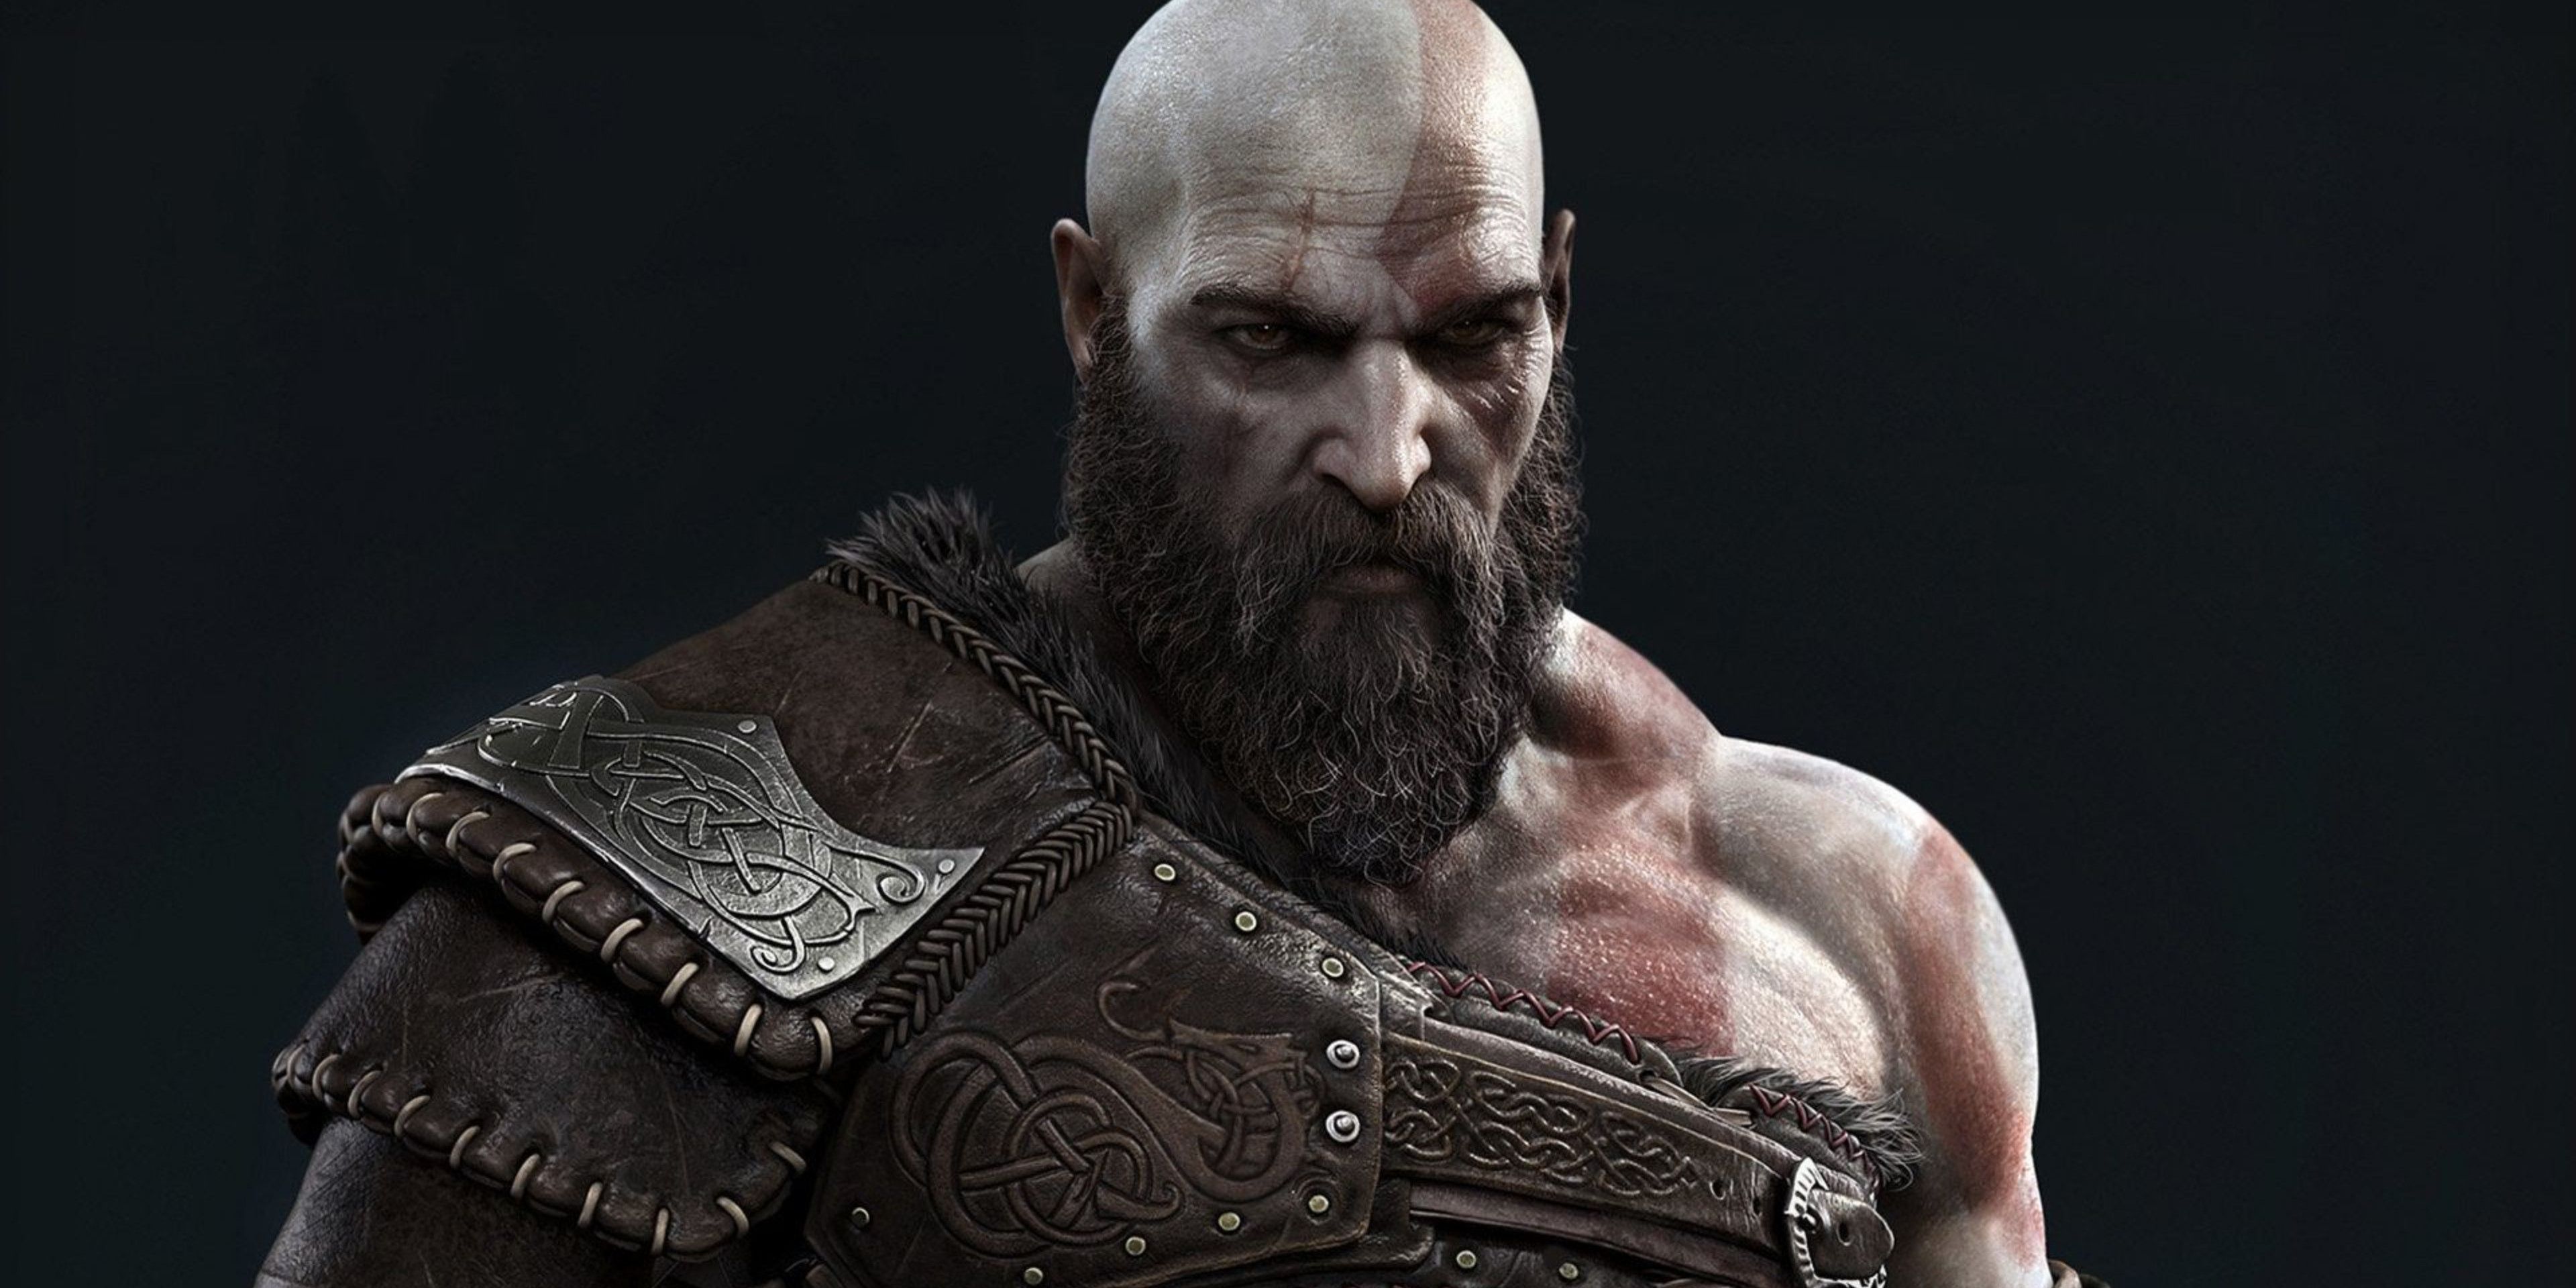 Profile image of kratos from the upcoming sequel to 2018's God of War